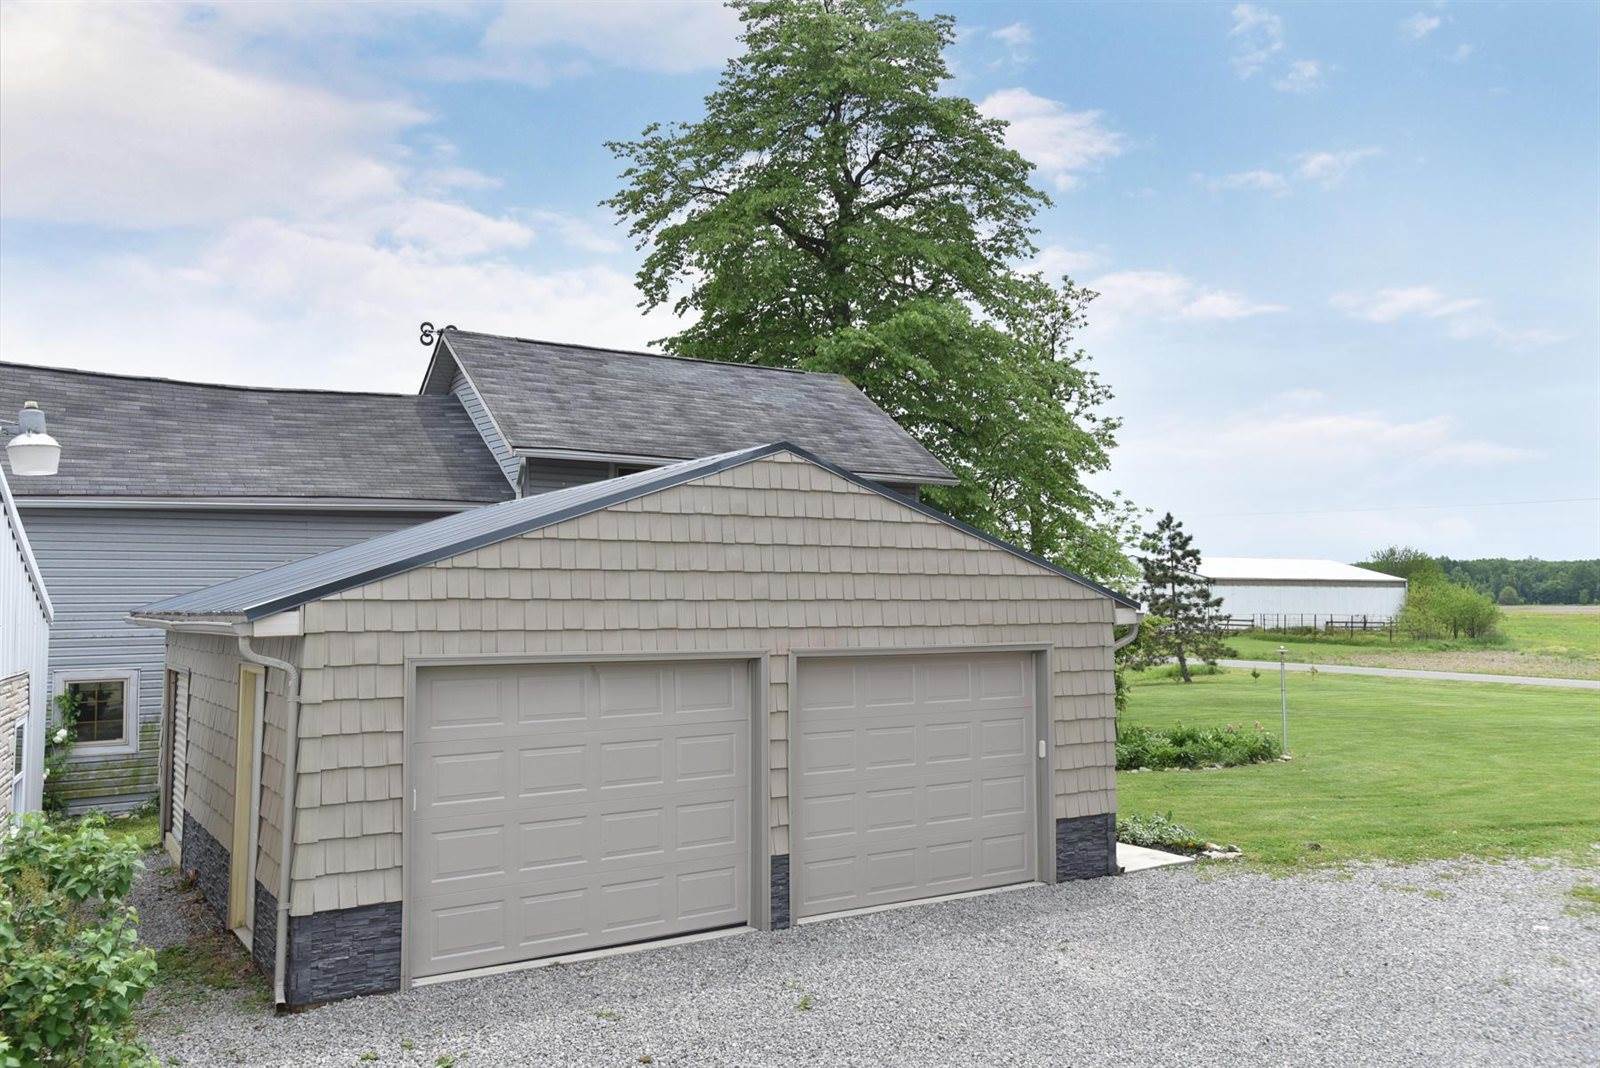 30760 Snare Road, Richwood, OH 43344